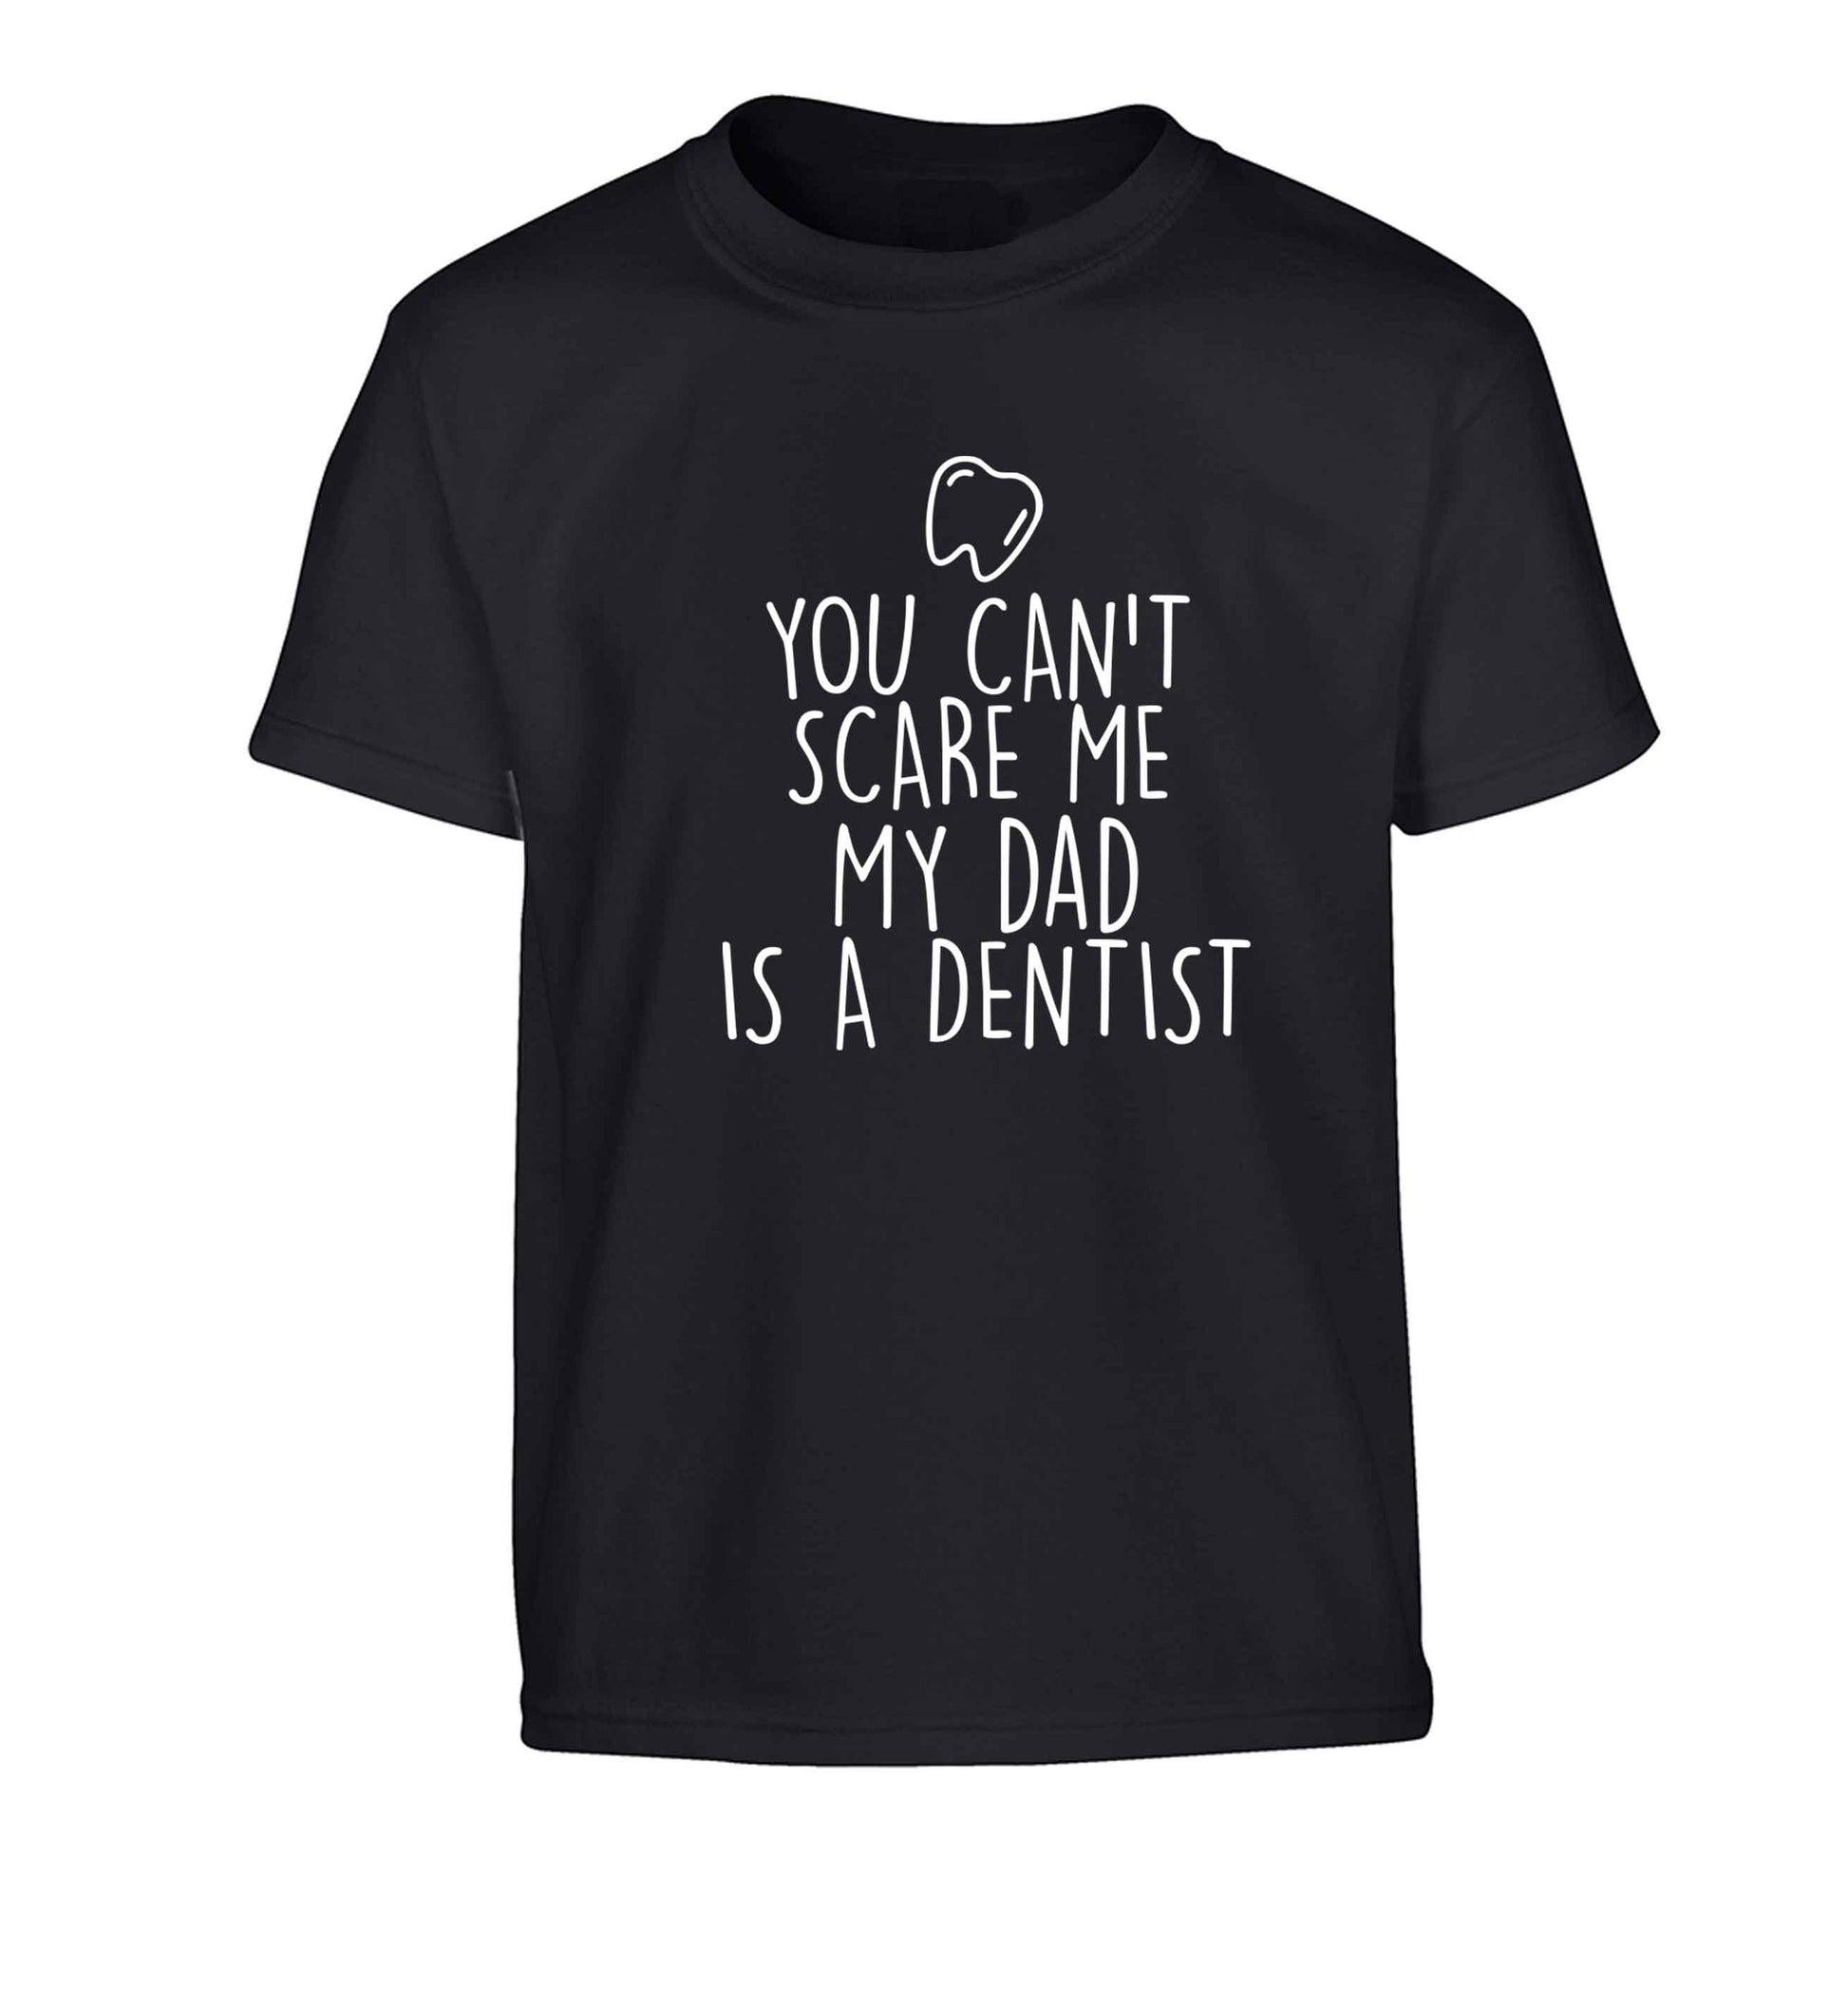 You can't scare me my dad is a dentist Children's black Tshirt 12-13 Years